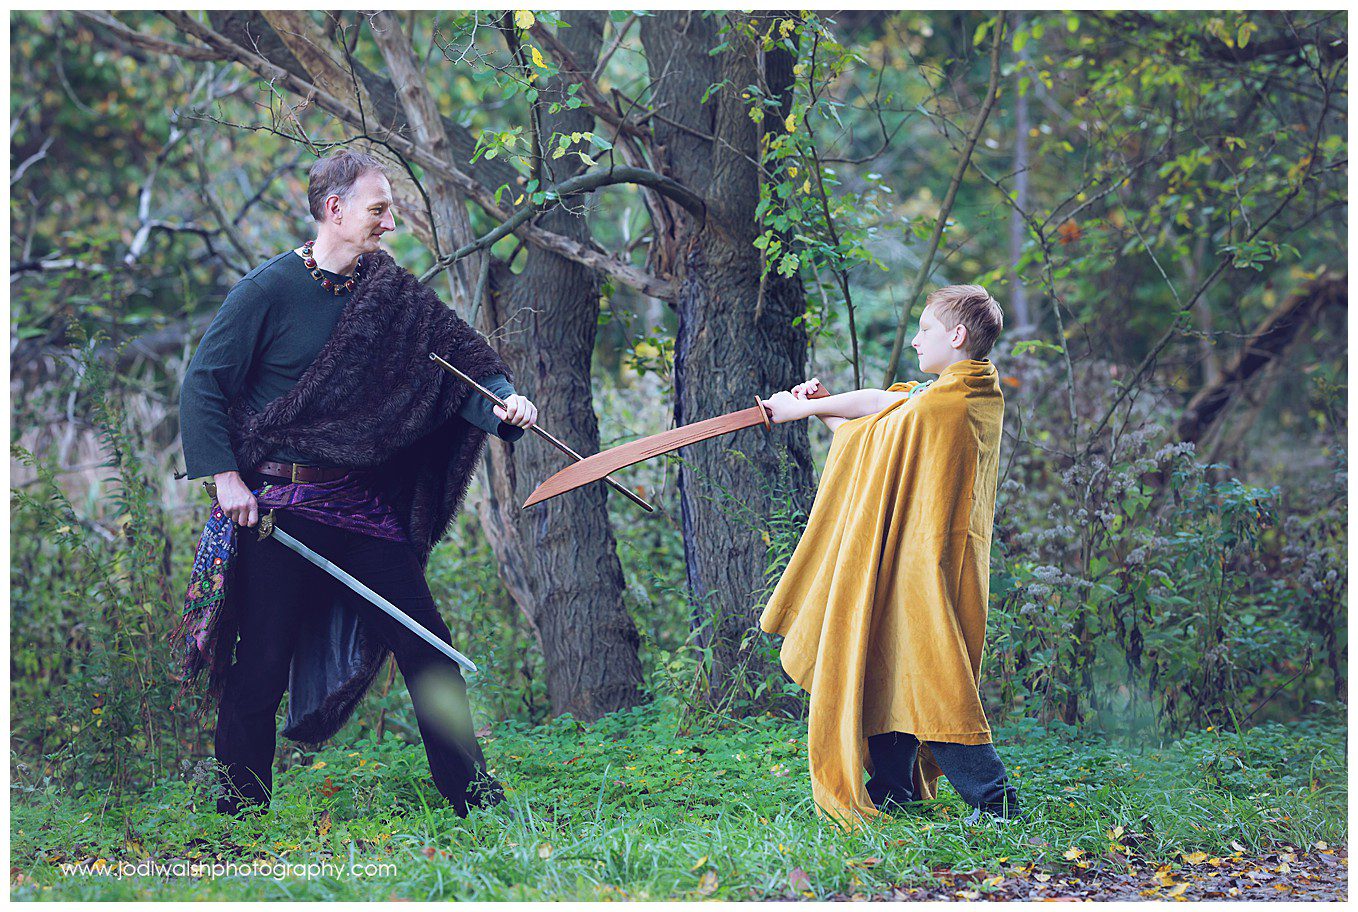 dad and young son playing at sword fighting